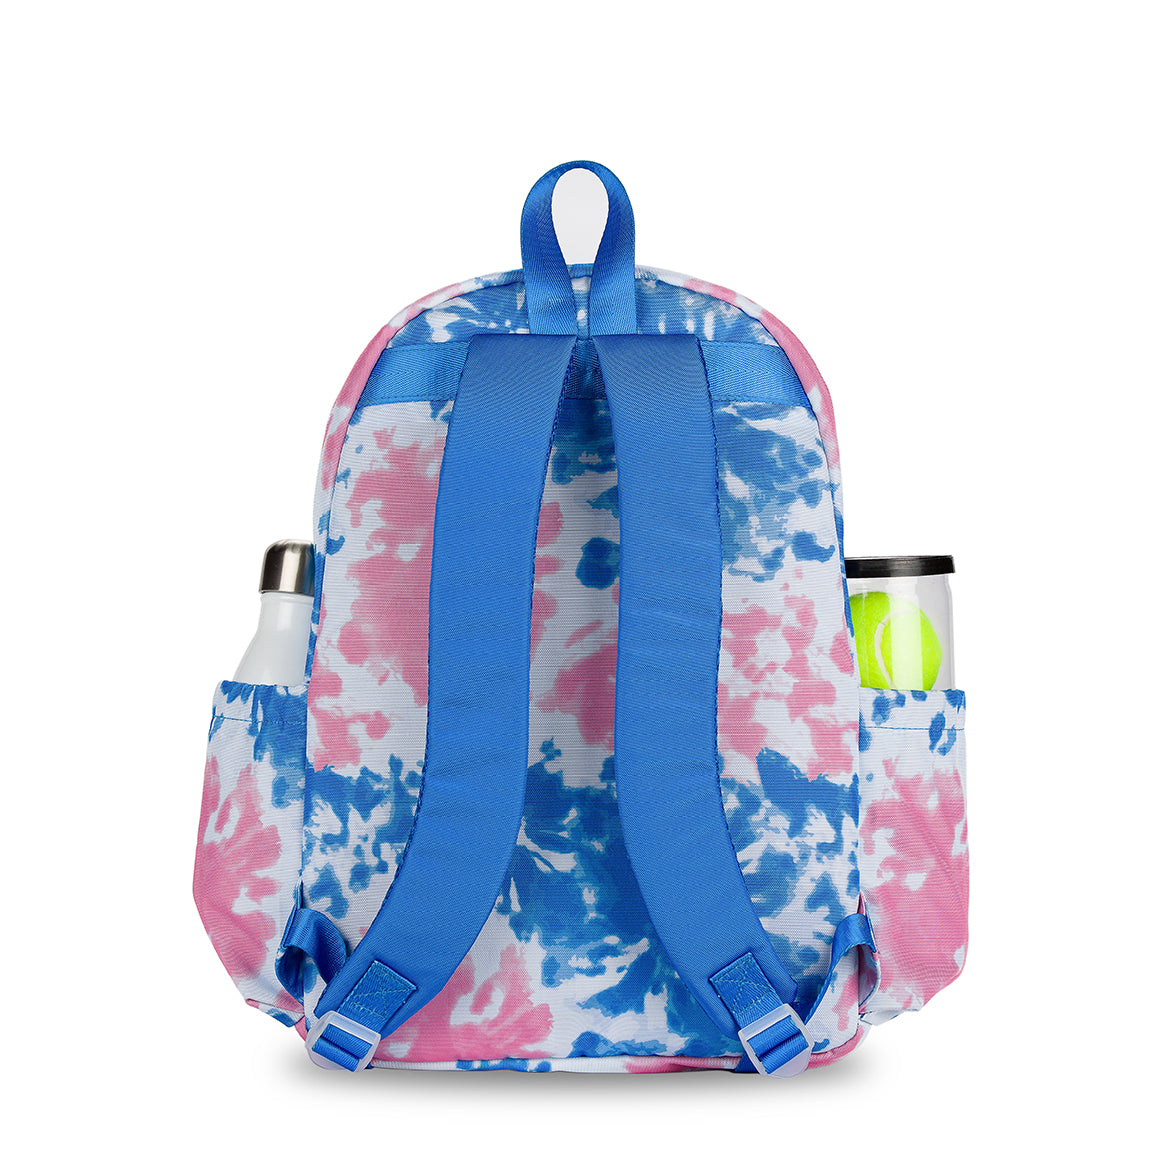 Back view of kid's tennis backpack with pink and blue tye dye pattern.